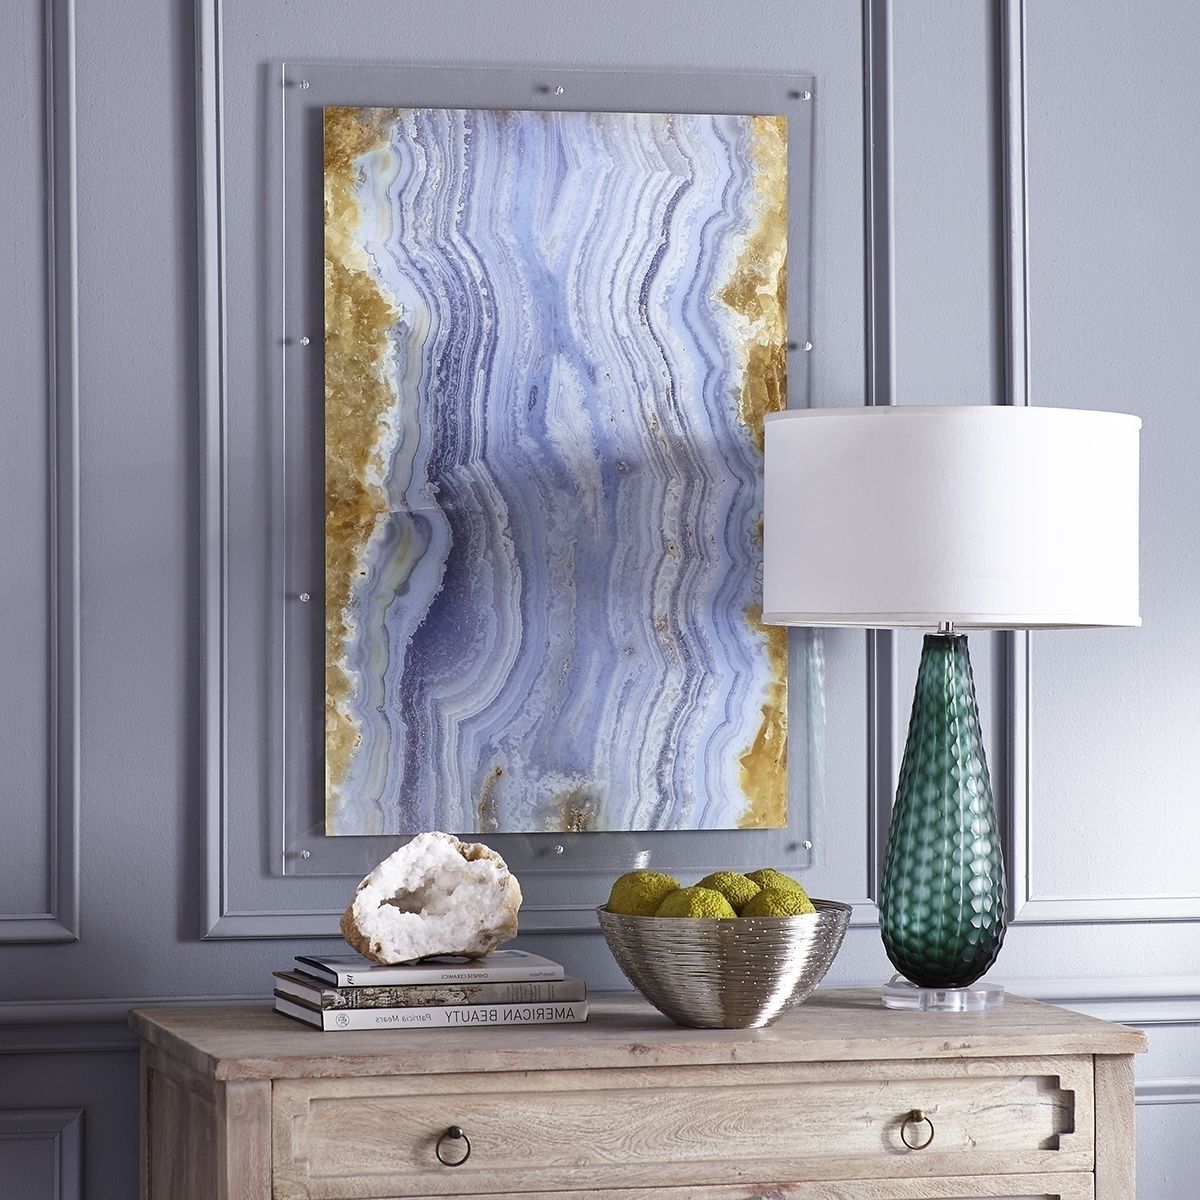 Showing Gallery Of Agate Wall Art View 7 Of 20 Photos | Wall Your With Regard To Agate Wall Art (View 10 of 20)